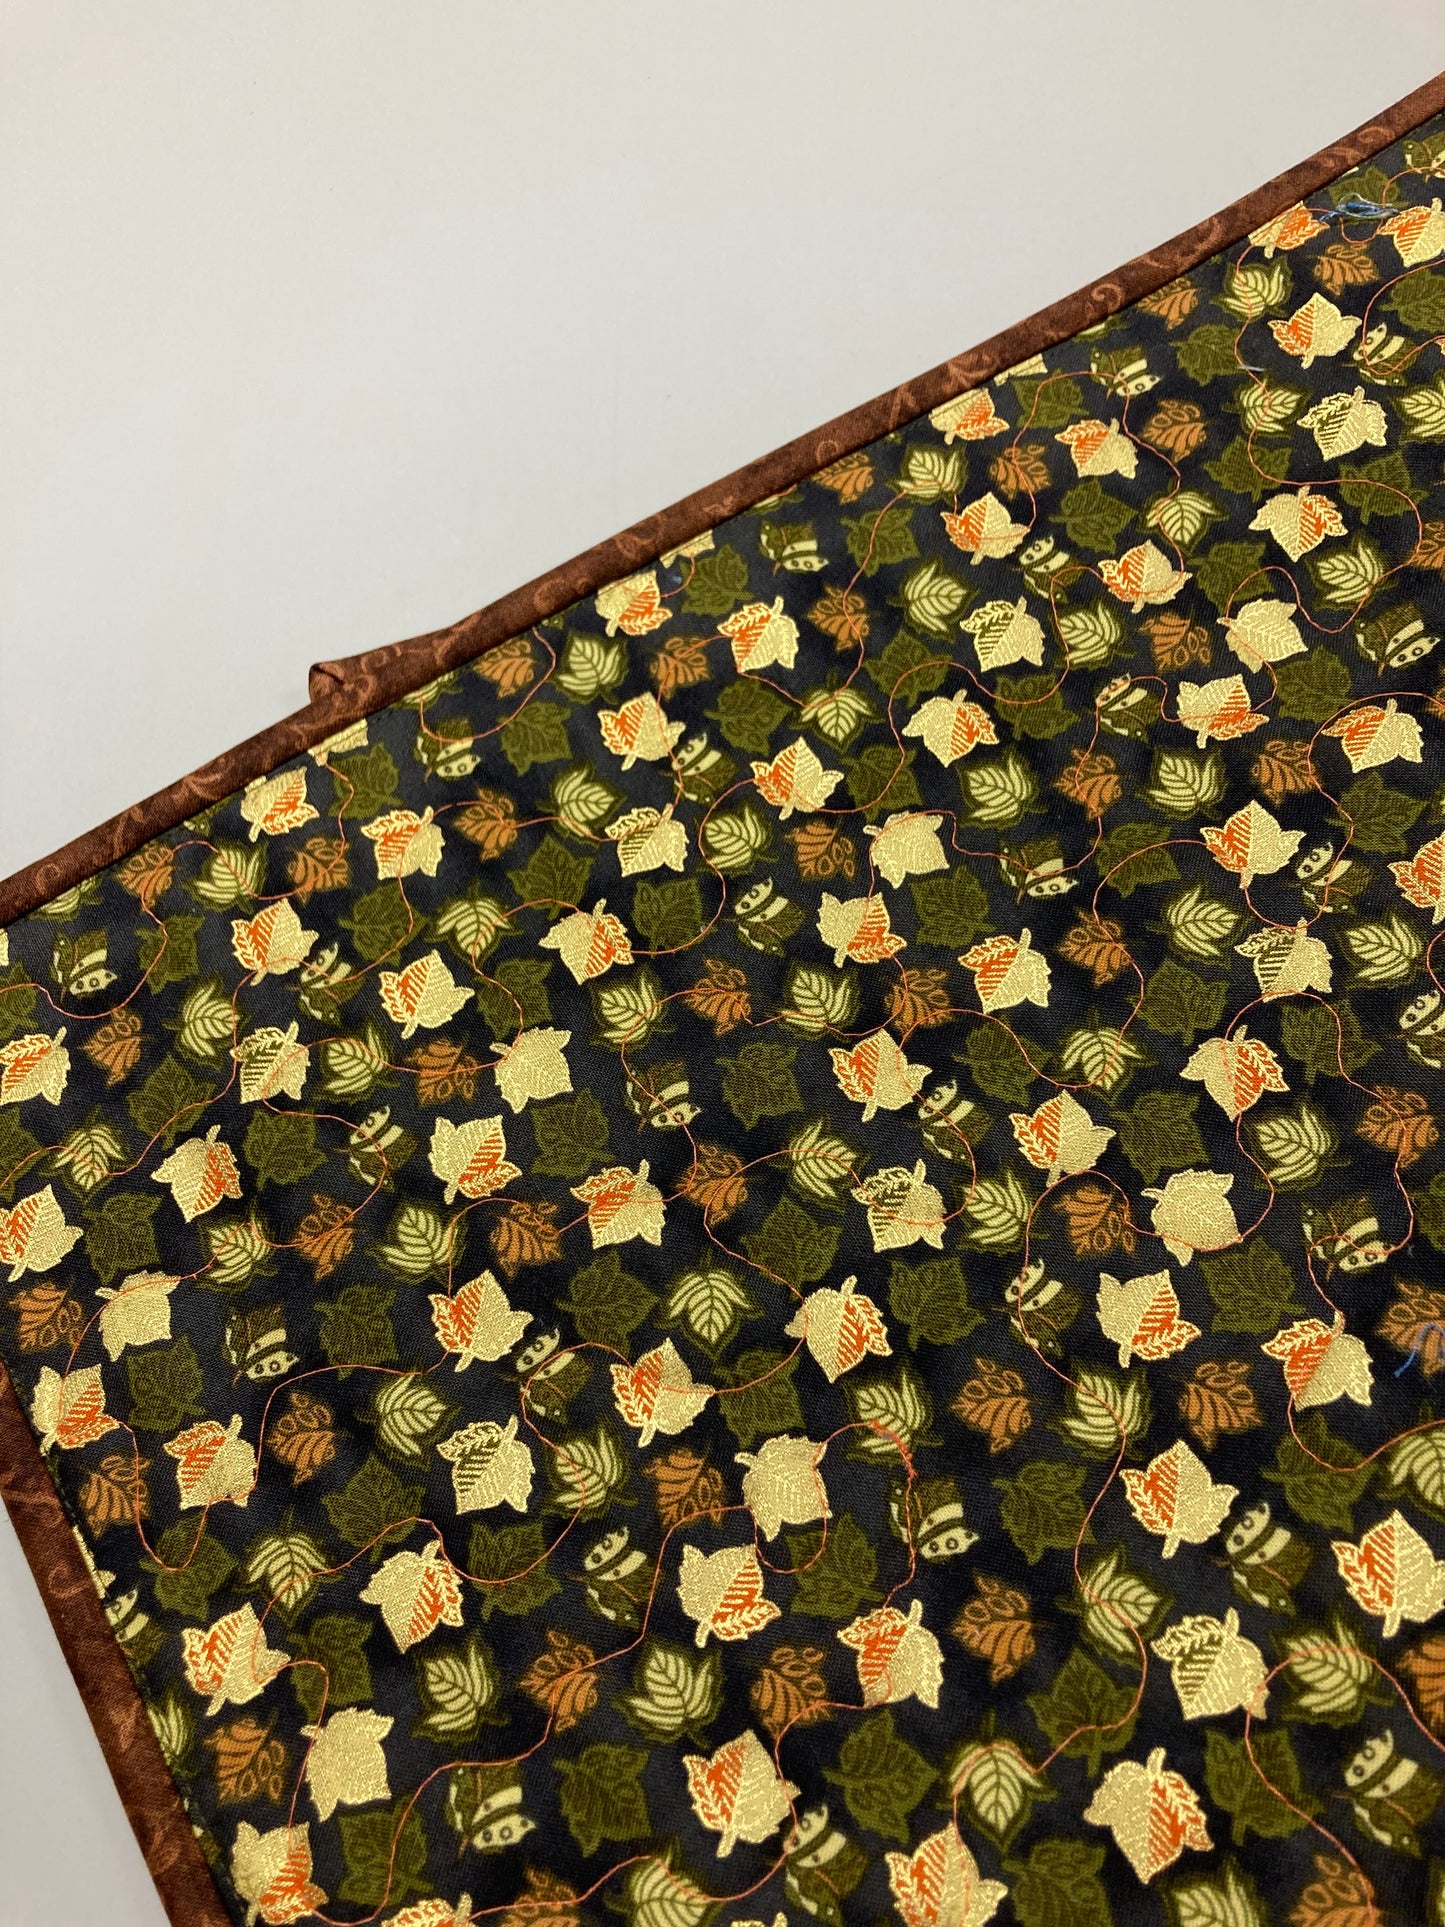 Fall Sunflowers Mushrooms and Acorns Quilted Table Runner, 14x48" Reversible Leaves, Woodland Forest Orange Red Green Dining Coffee Table